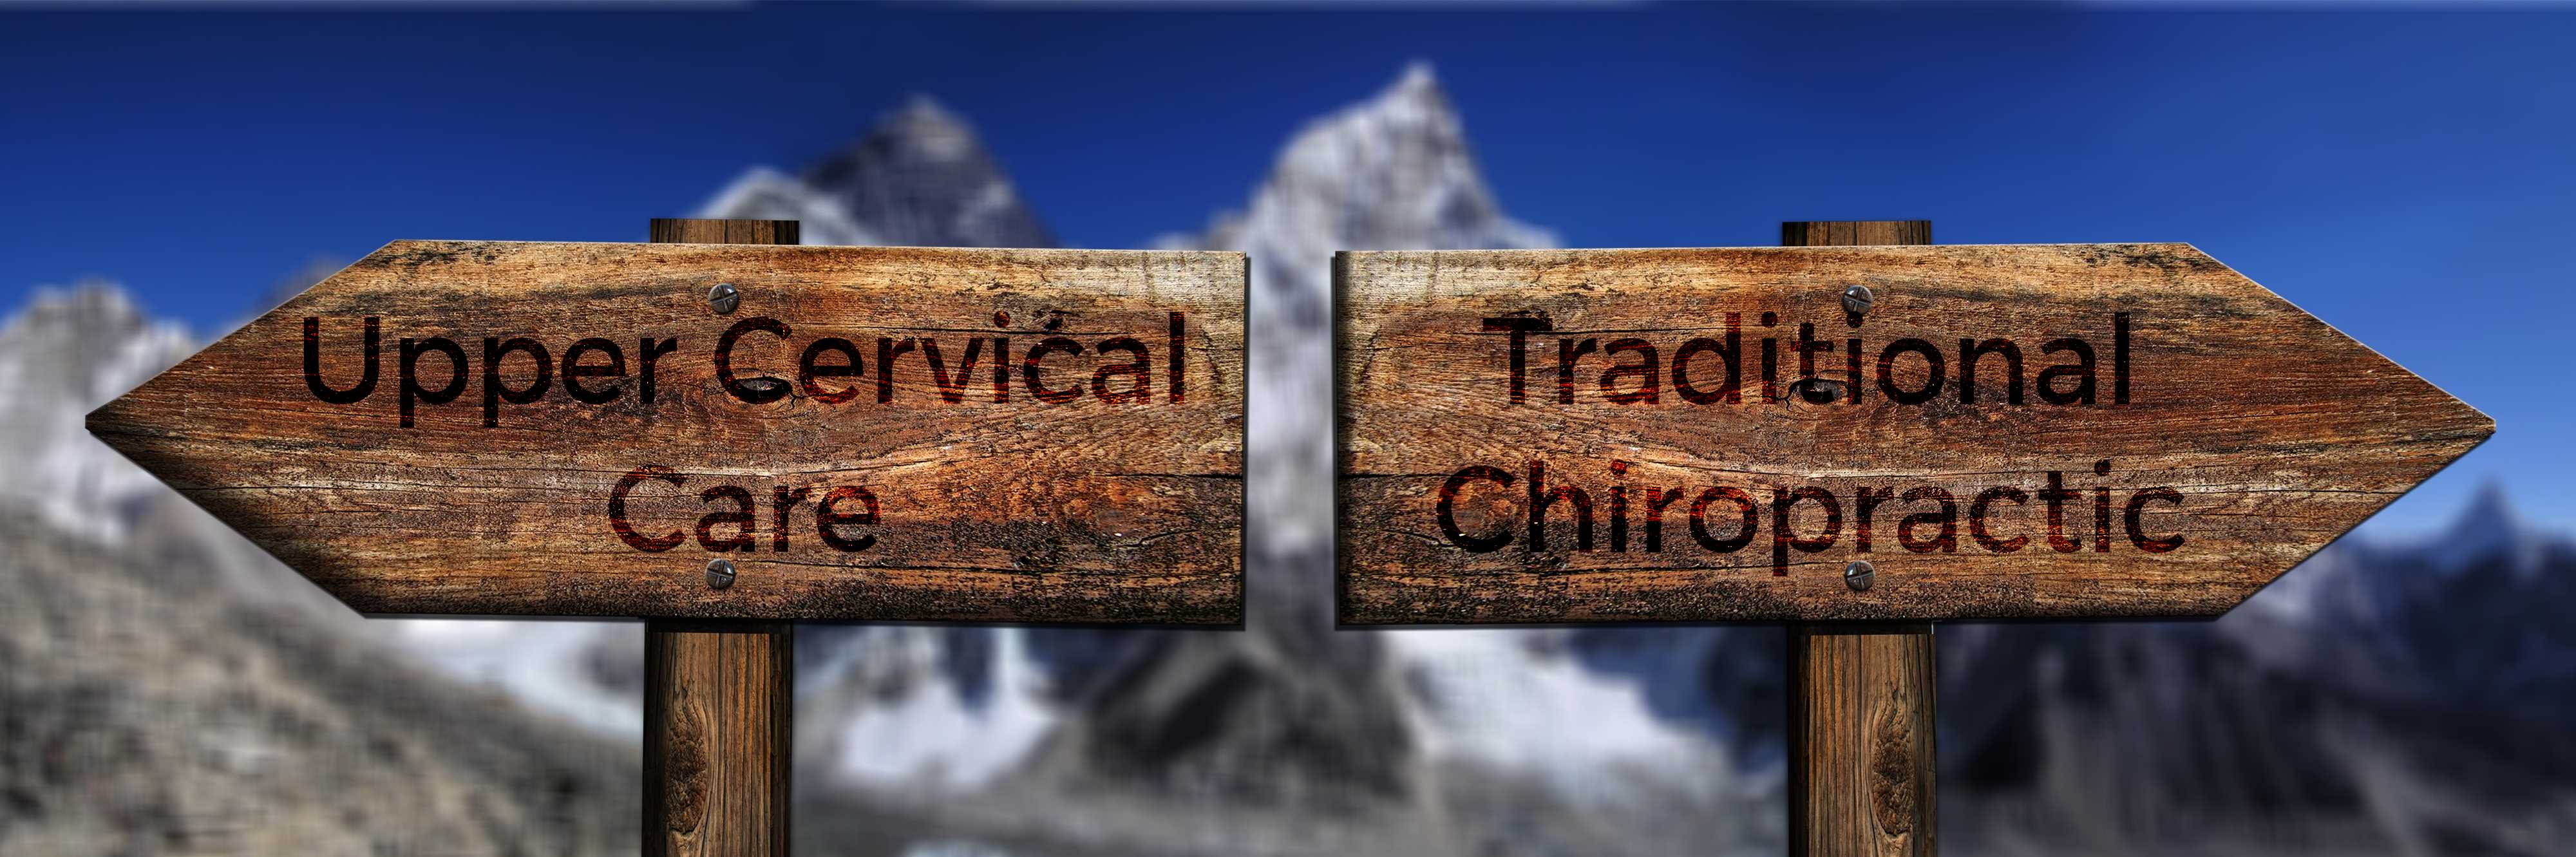 7 Ways Upper Cervical Care Differs From Traditional Chiropractic